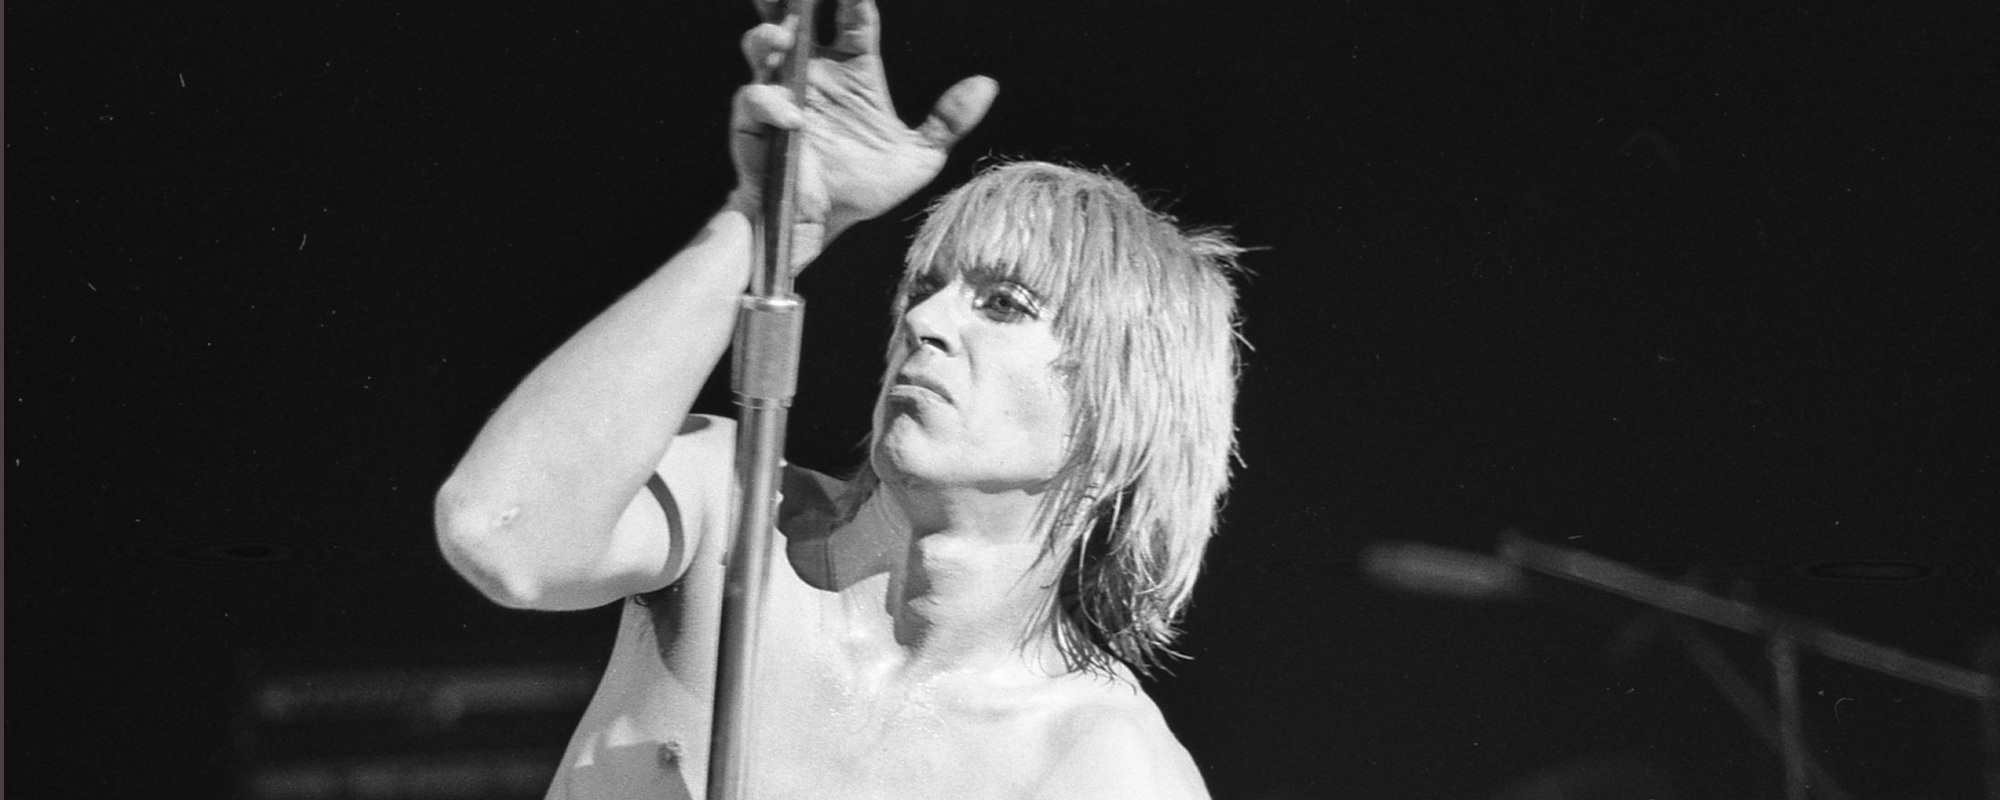 Behind the Spirit-Lifting History and Meaning of “Lust for Life” by Iggy Pop